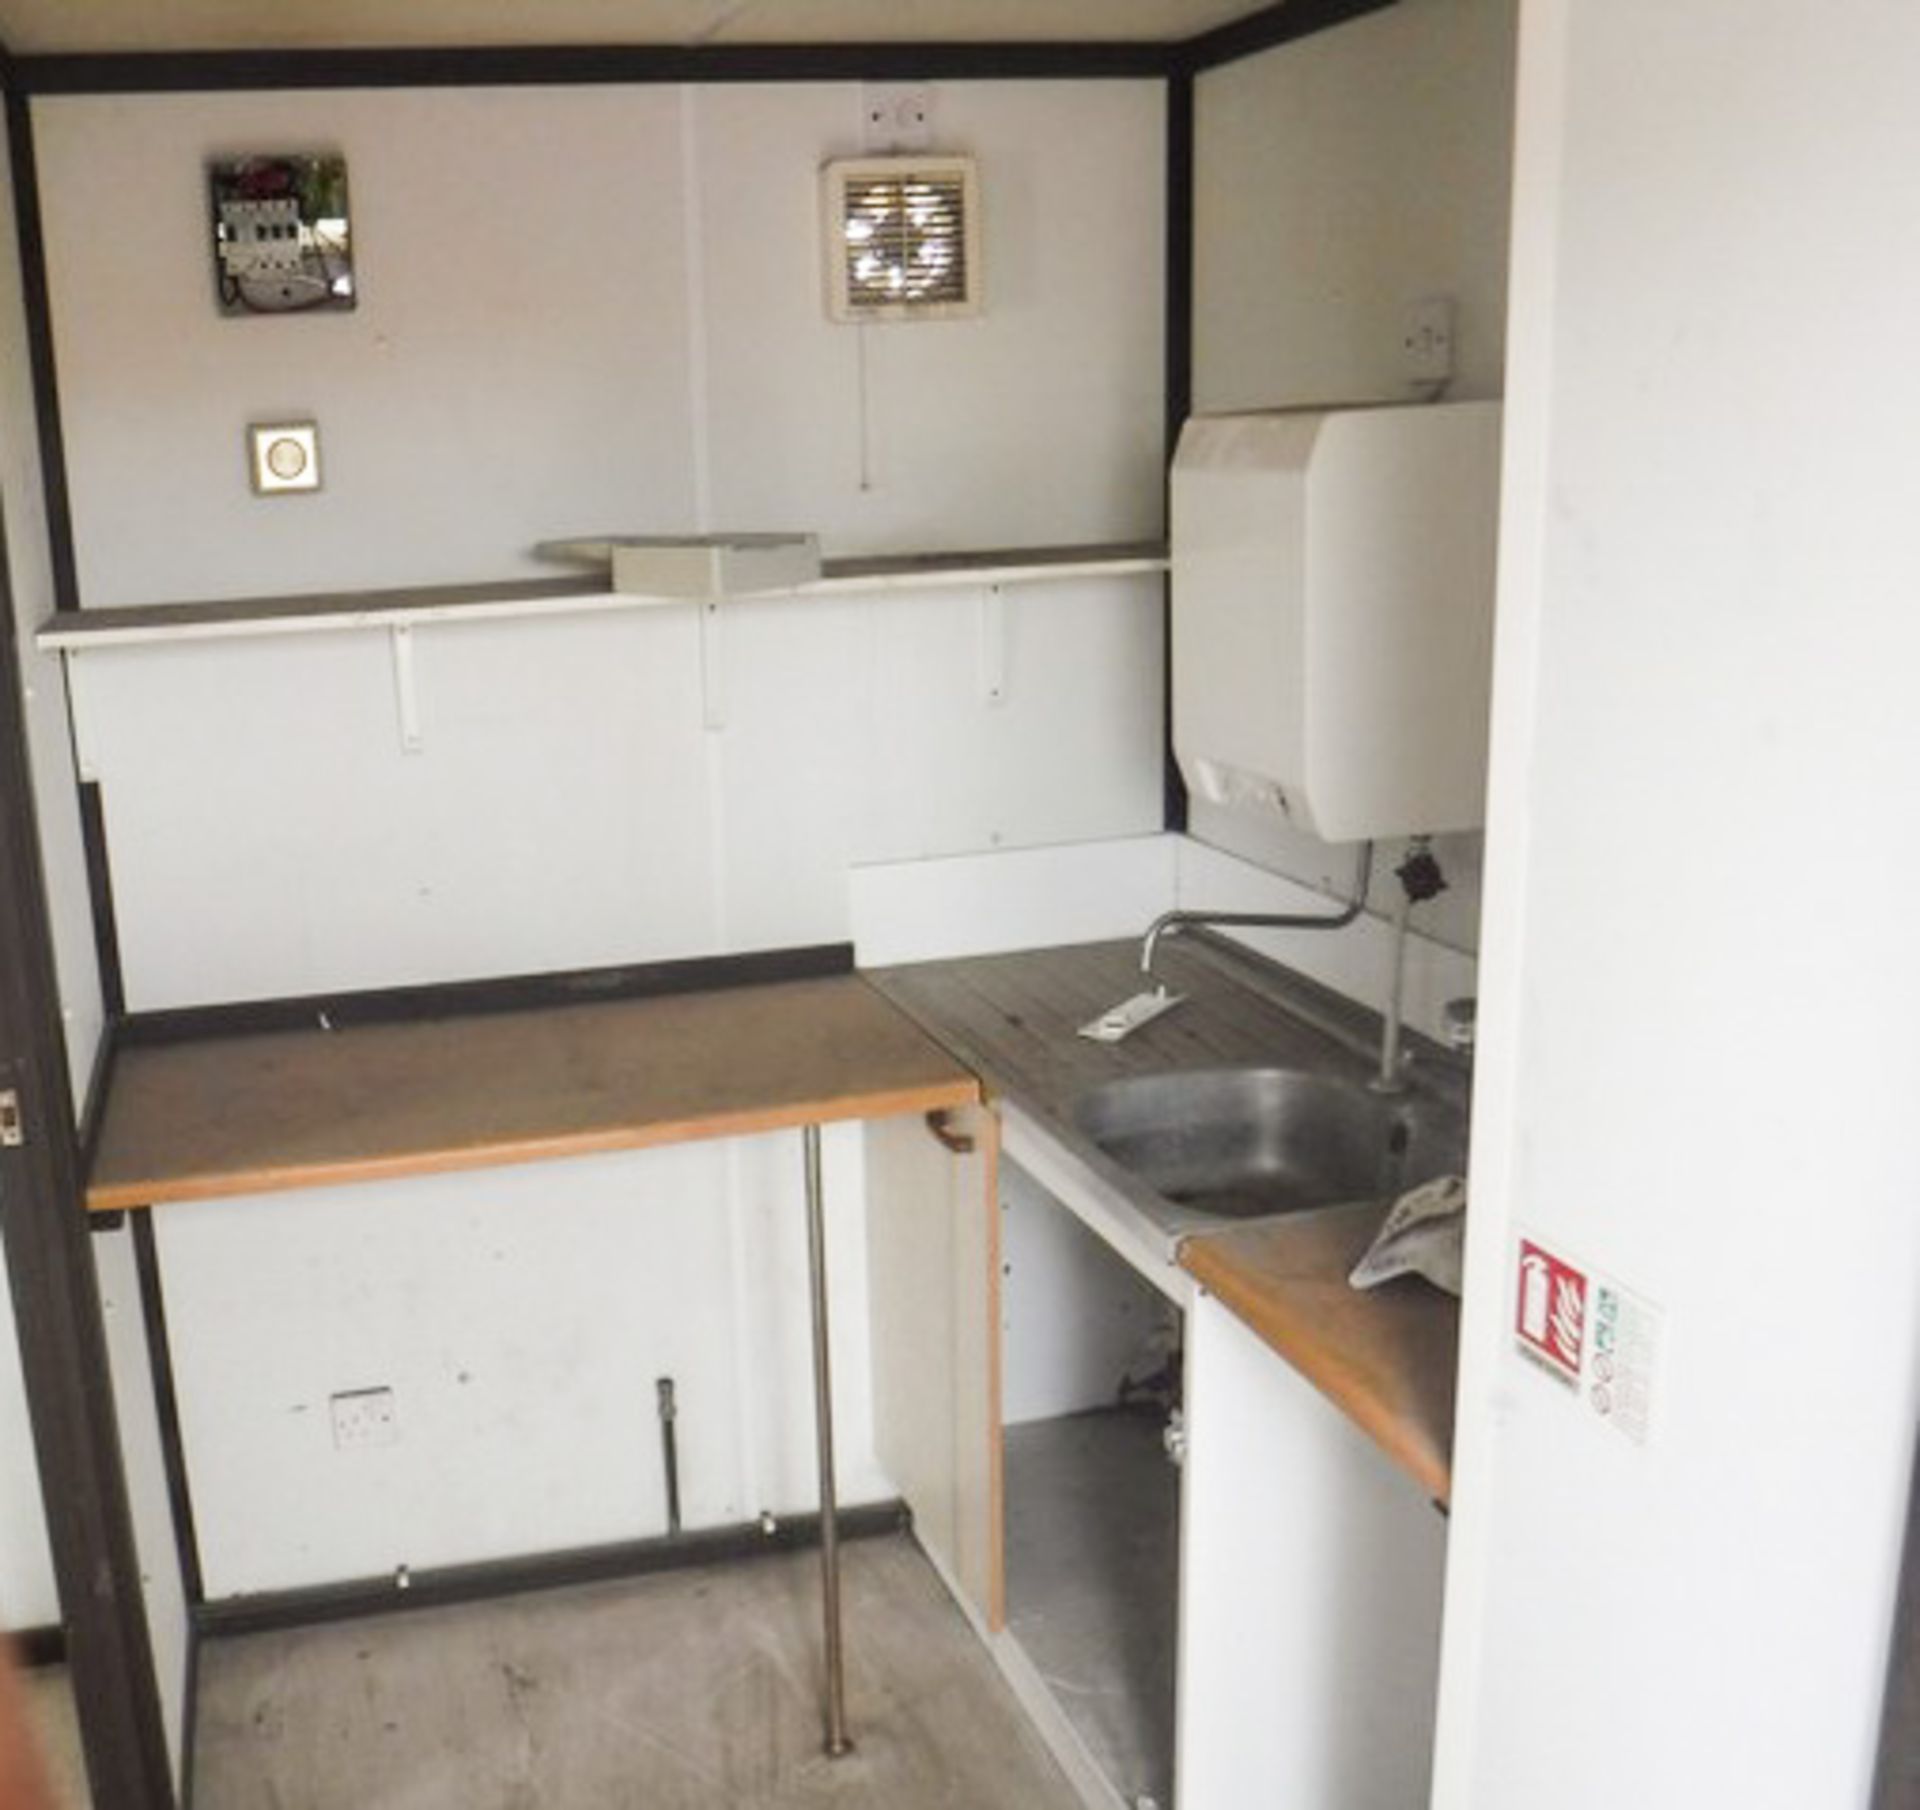 USED 20 X 8 CANTEEN UNIT, 2 SEPARATE SEATING AREAS, WORKTOP, SINK & WATER HEATER - Image 9 of 13